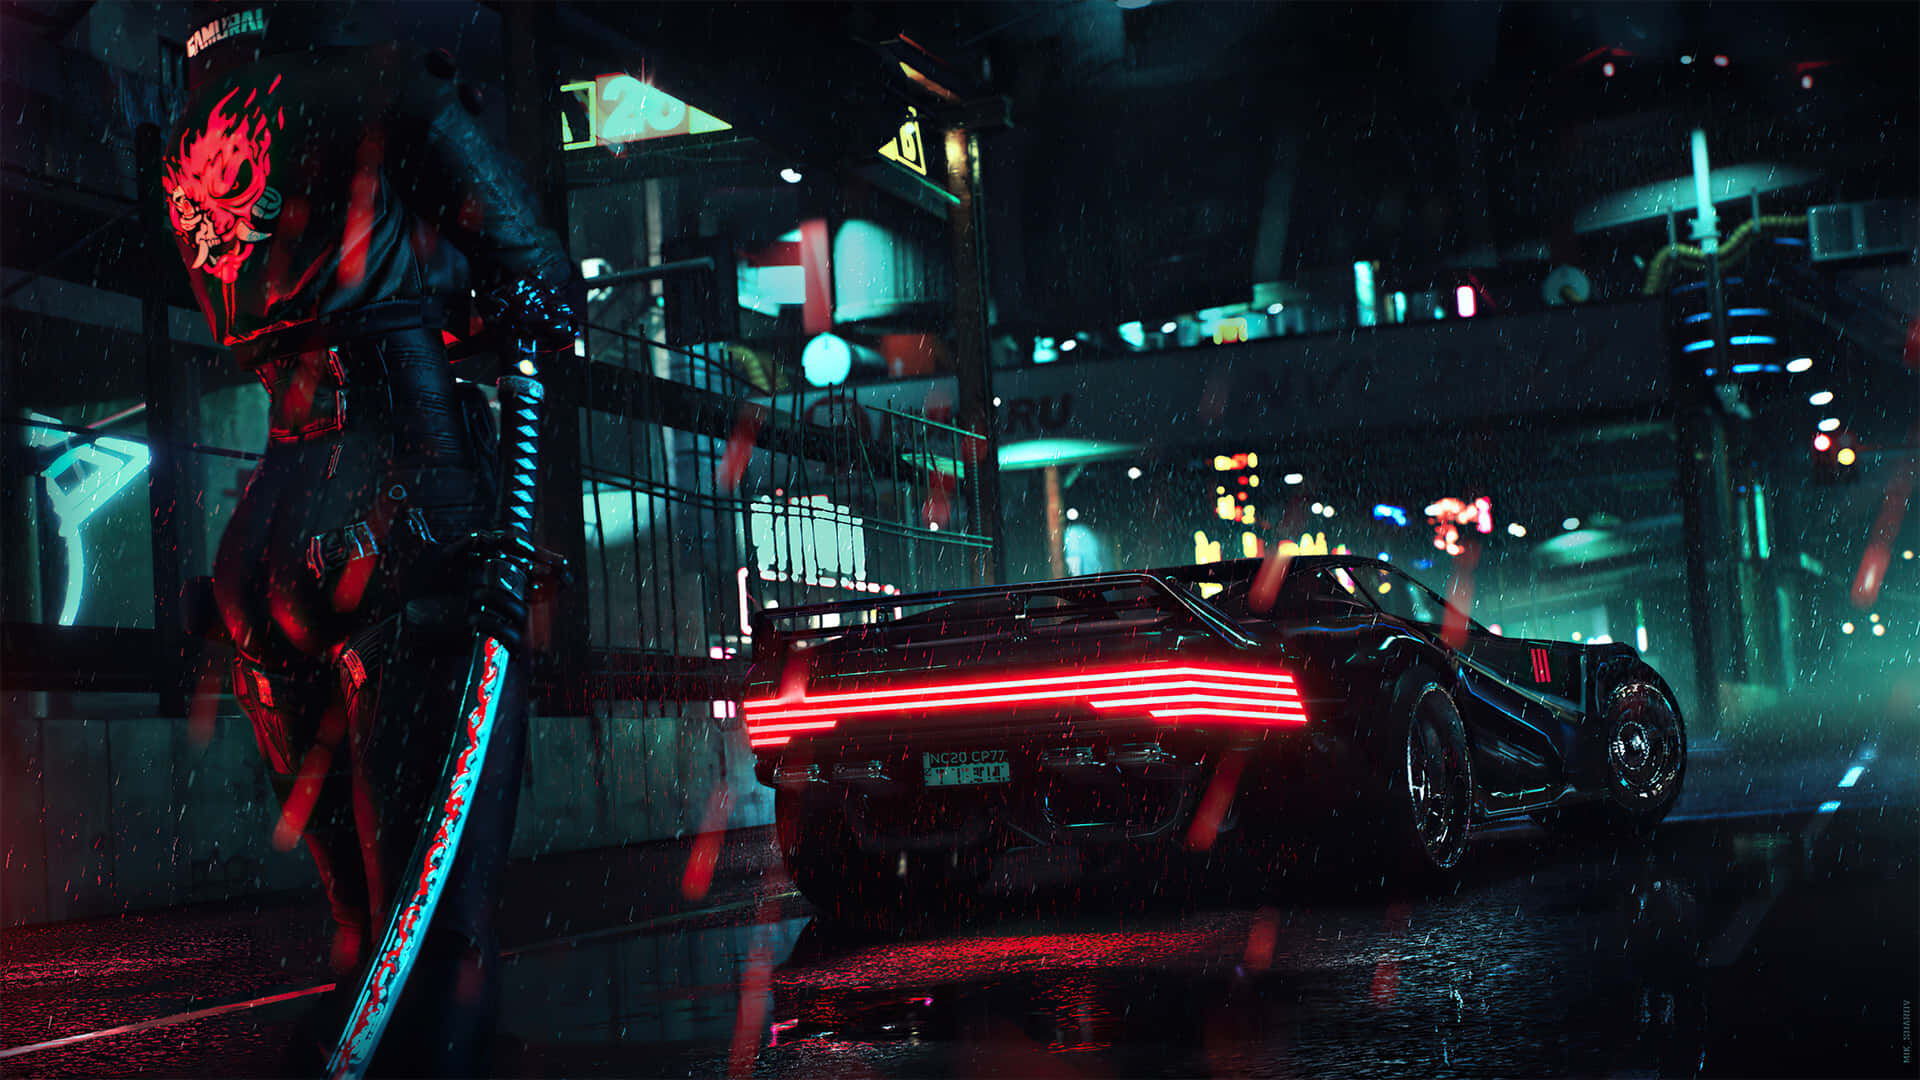 An electrifying moment in the world of Cyberpunk 2077